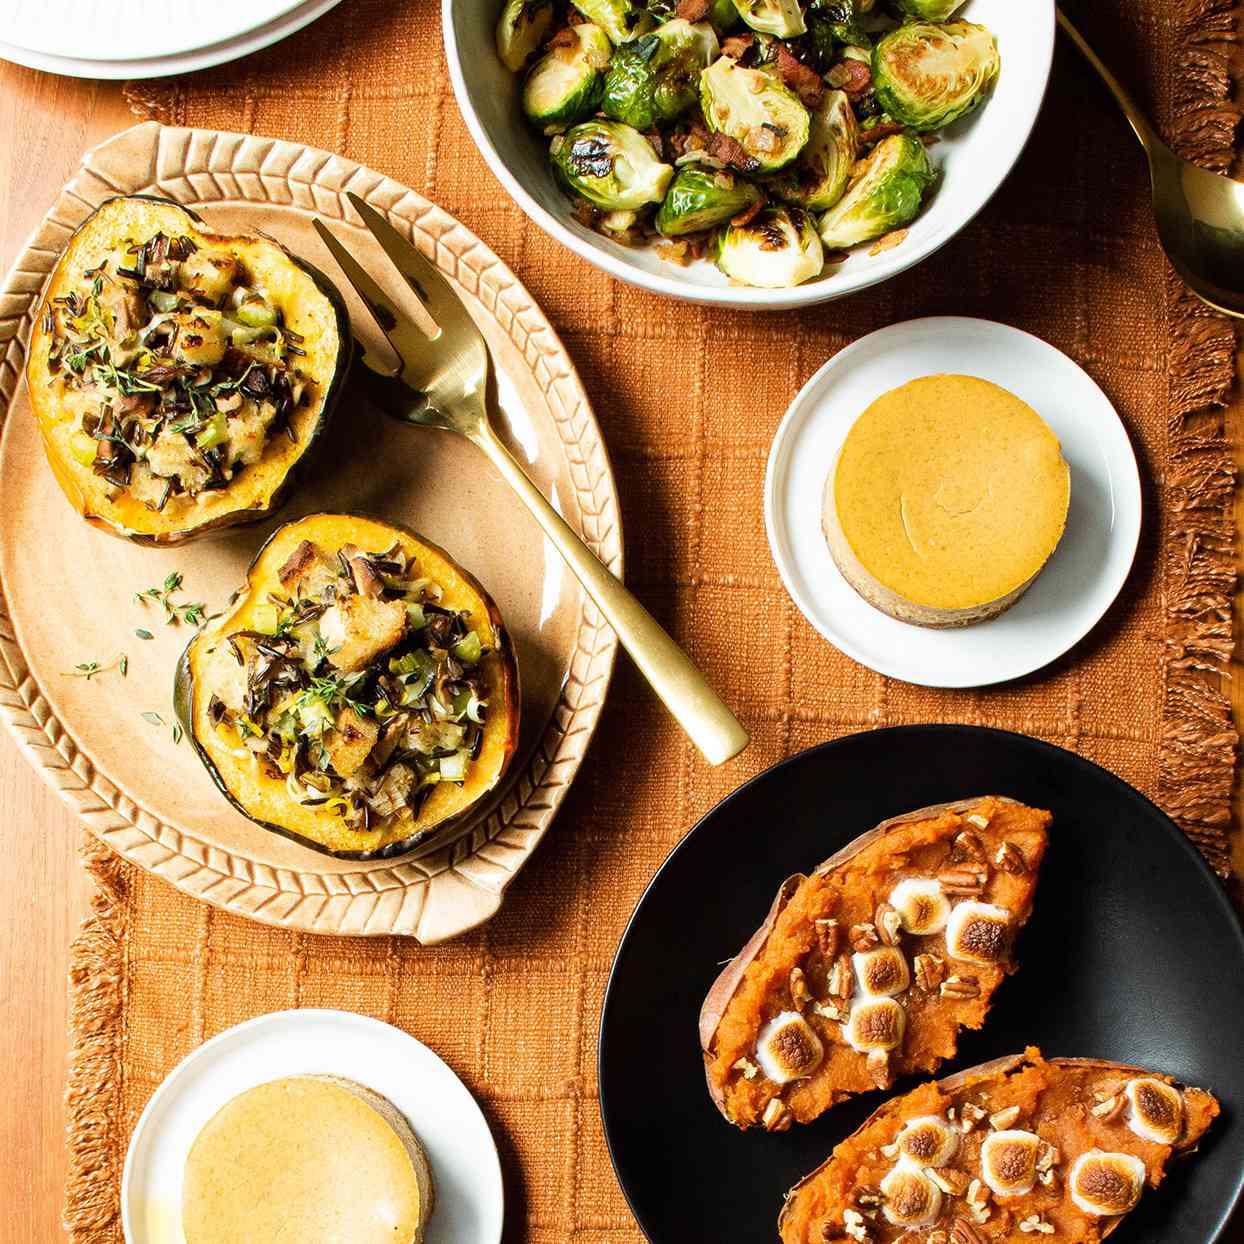 Table set with sweet potatoes, pumpkin cheesecake, stuffed squash and Brussels sprouts